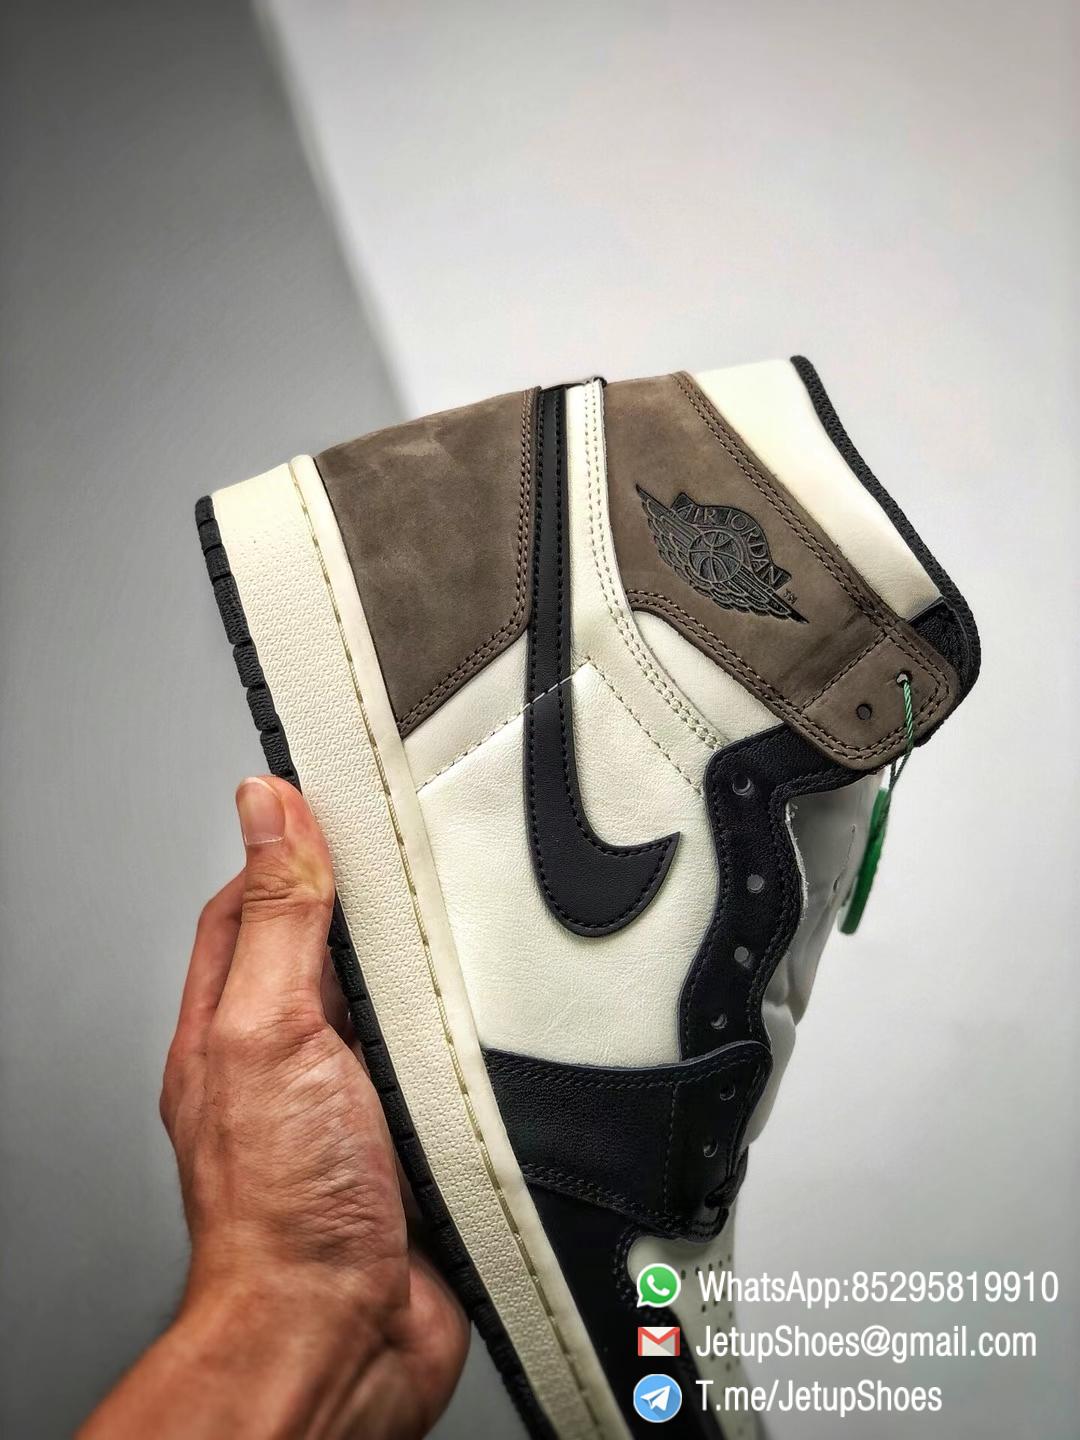 Best Replica Air Jordan 1 Retro High OG Dark Mocha Off white Leather Base and Black Overylays Top Quality Sneakers 05